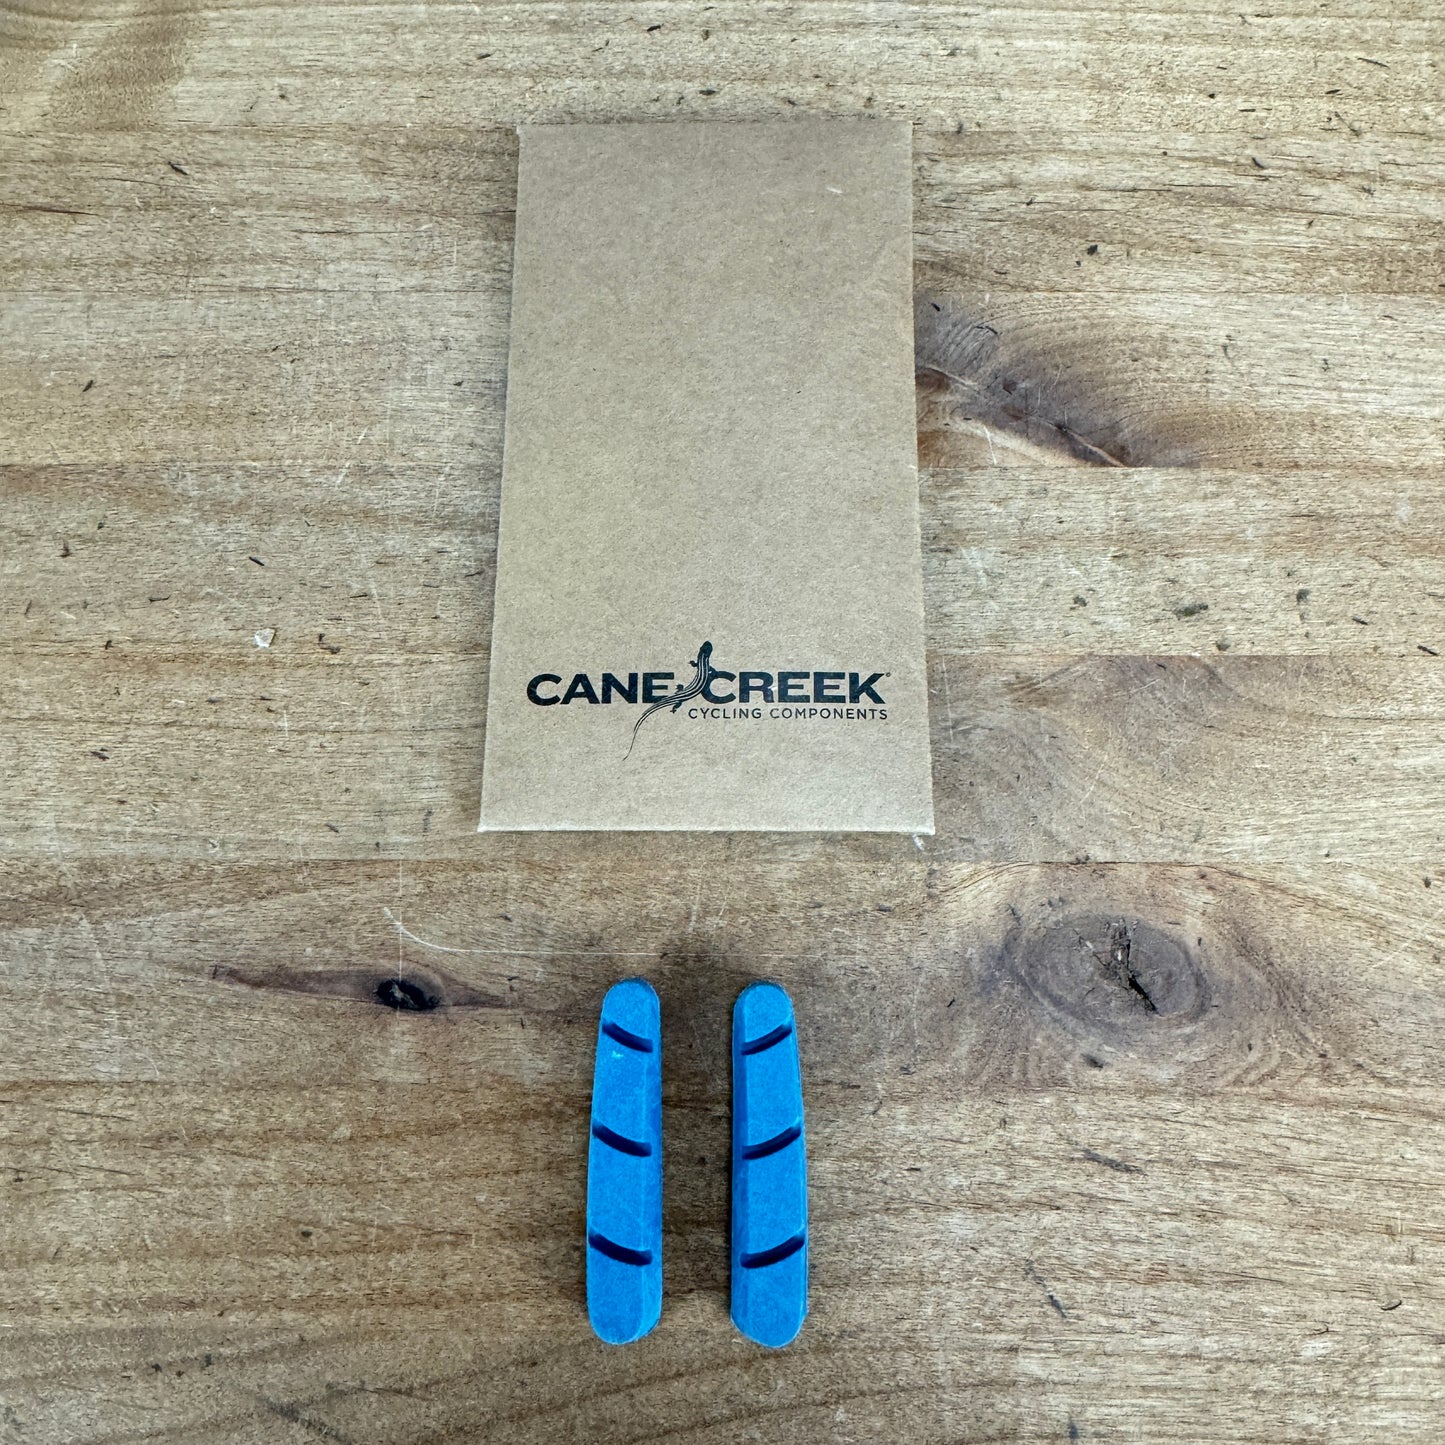 New! Cane Creek Pair Carbon Rim Brake Pad Inserts 11g BEE0234 Replacement Pads